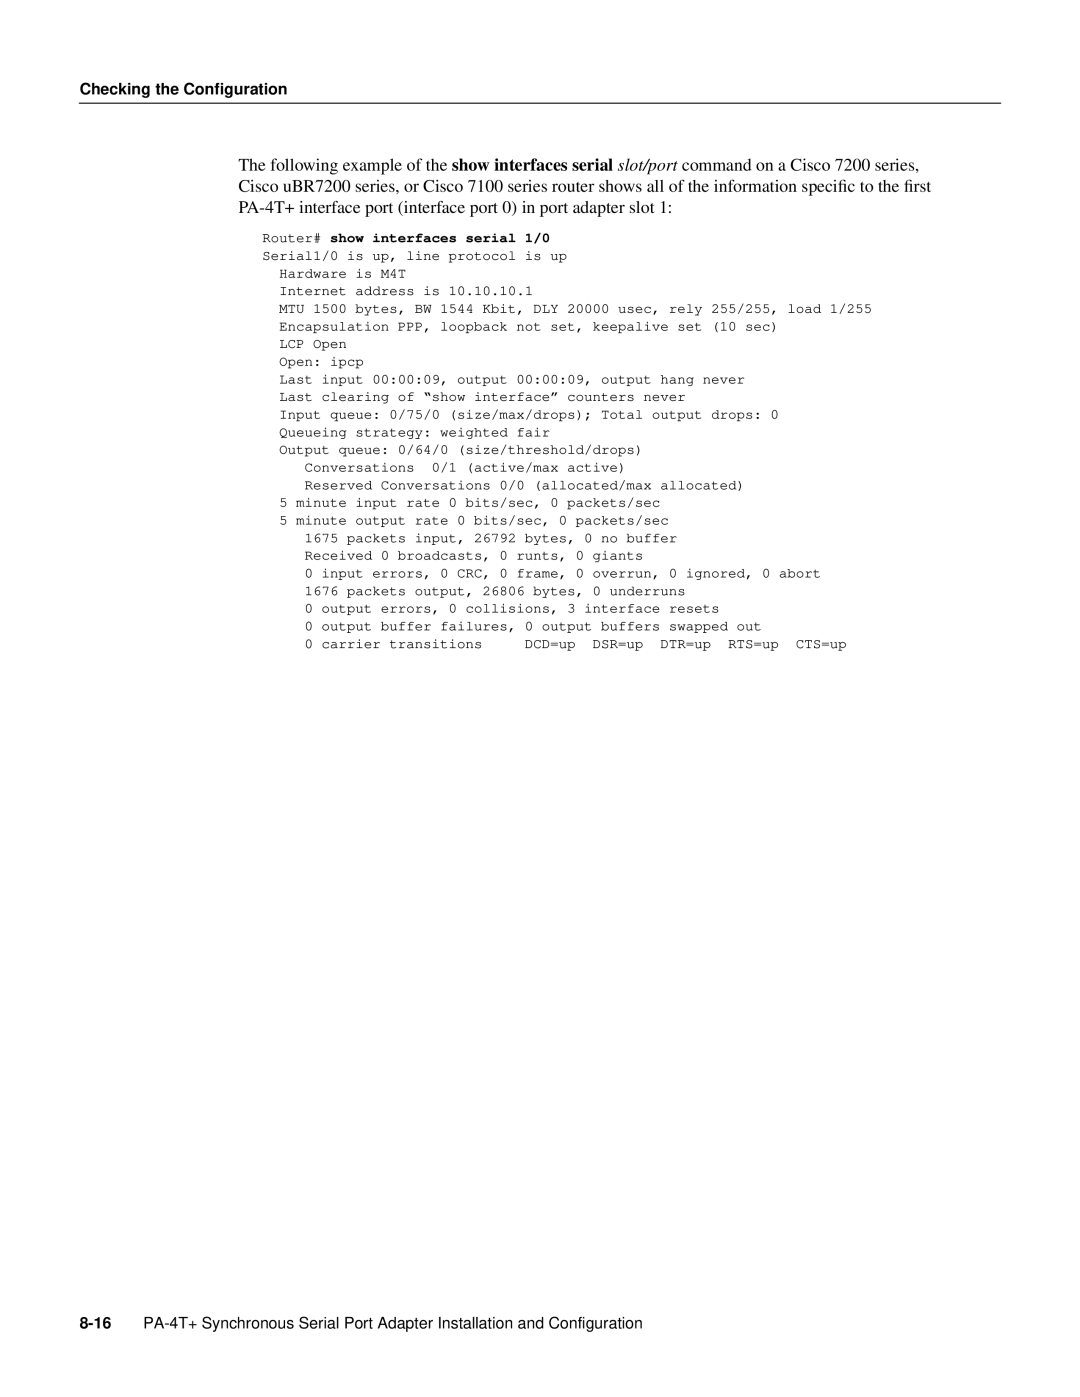 Cisco Systems PA-4T manual Checking the Configuration 